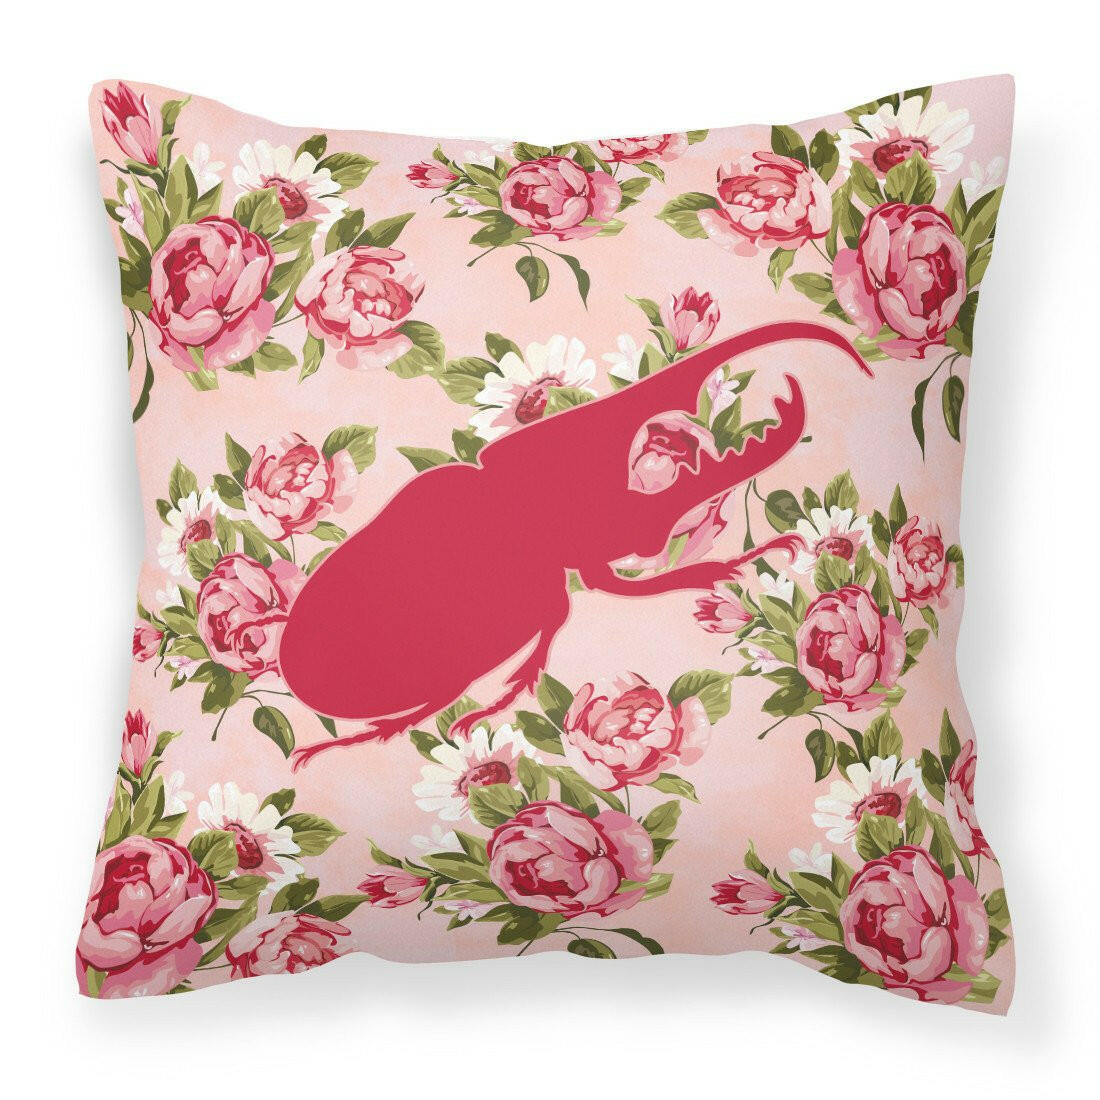 Beetle Shabby Chic Pink Roses  Fabric Decorative Pillow BB1056-RS-PK-PW1414 - the-store.com